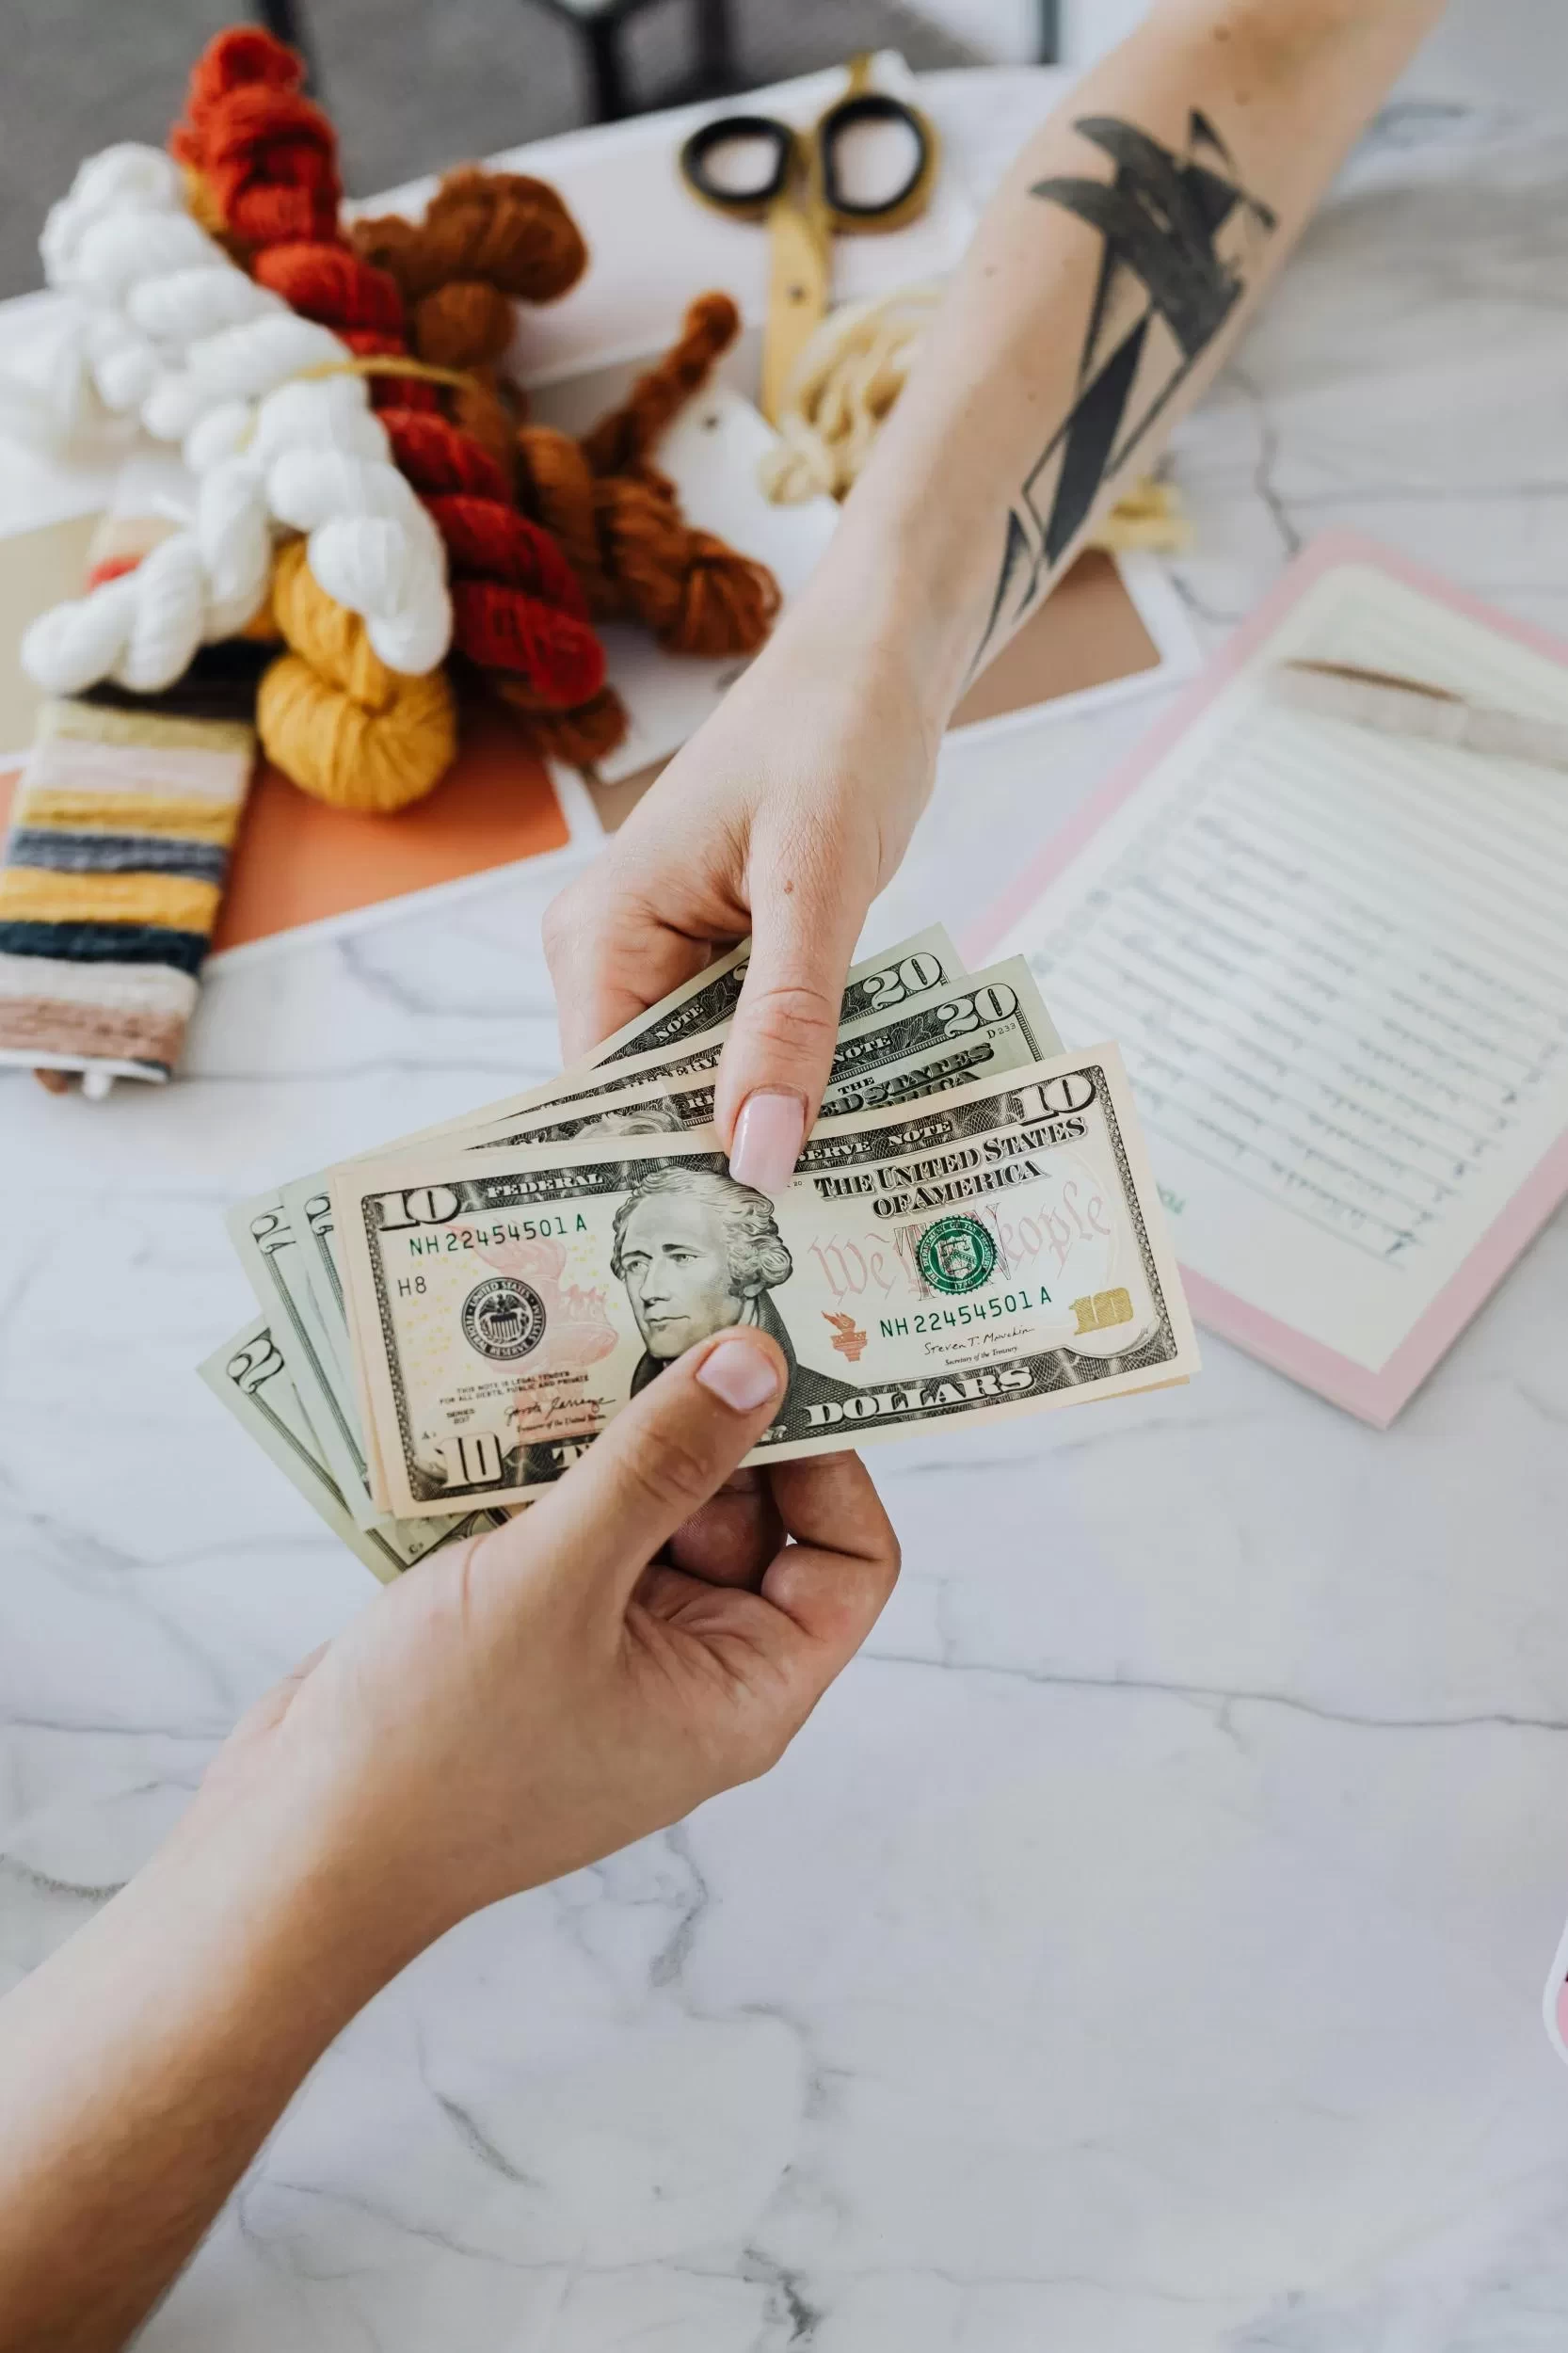 Discover a hassle-free way to save without overthinking. Start building your financial future today! The round-ups from your debit card purchases are accumulated and transferred daily from your Round Up Checking account to your Super Savings Account.